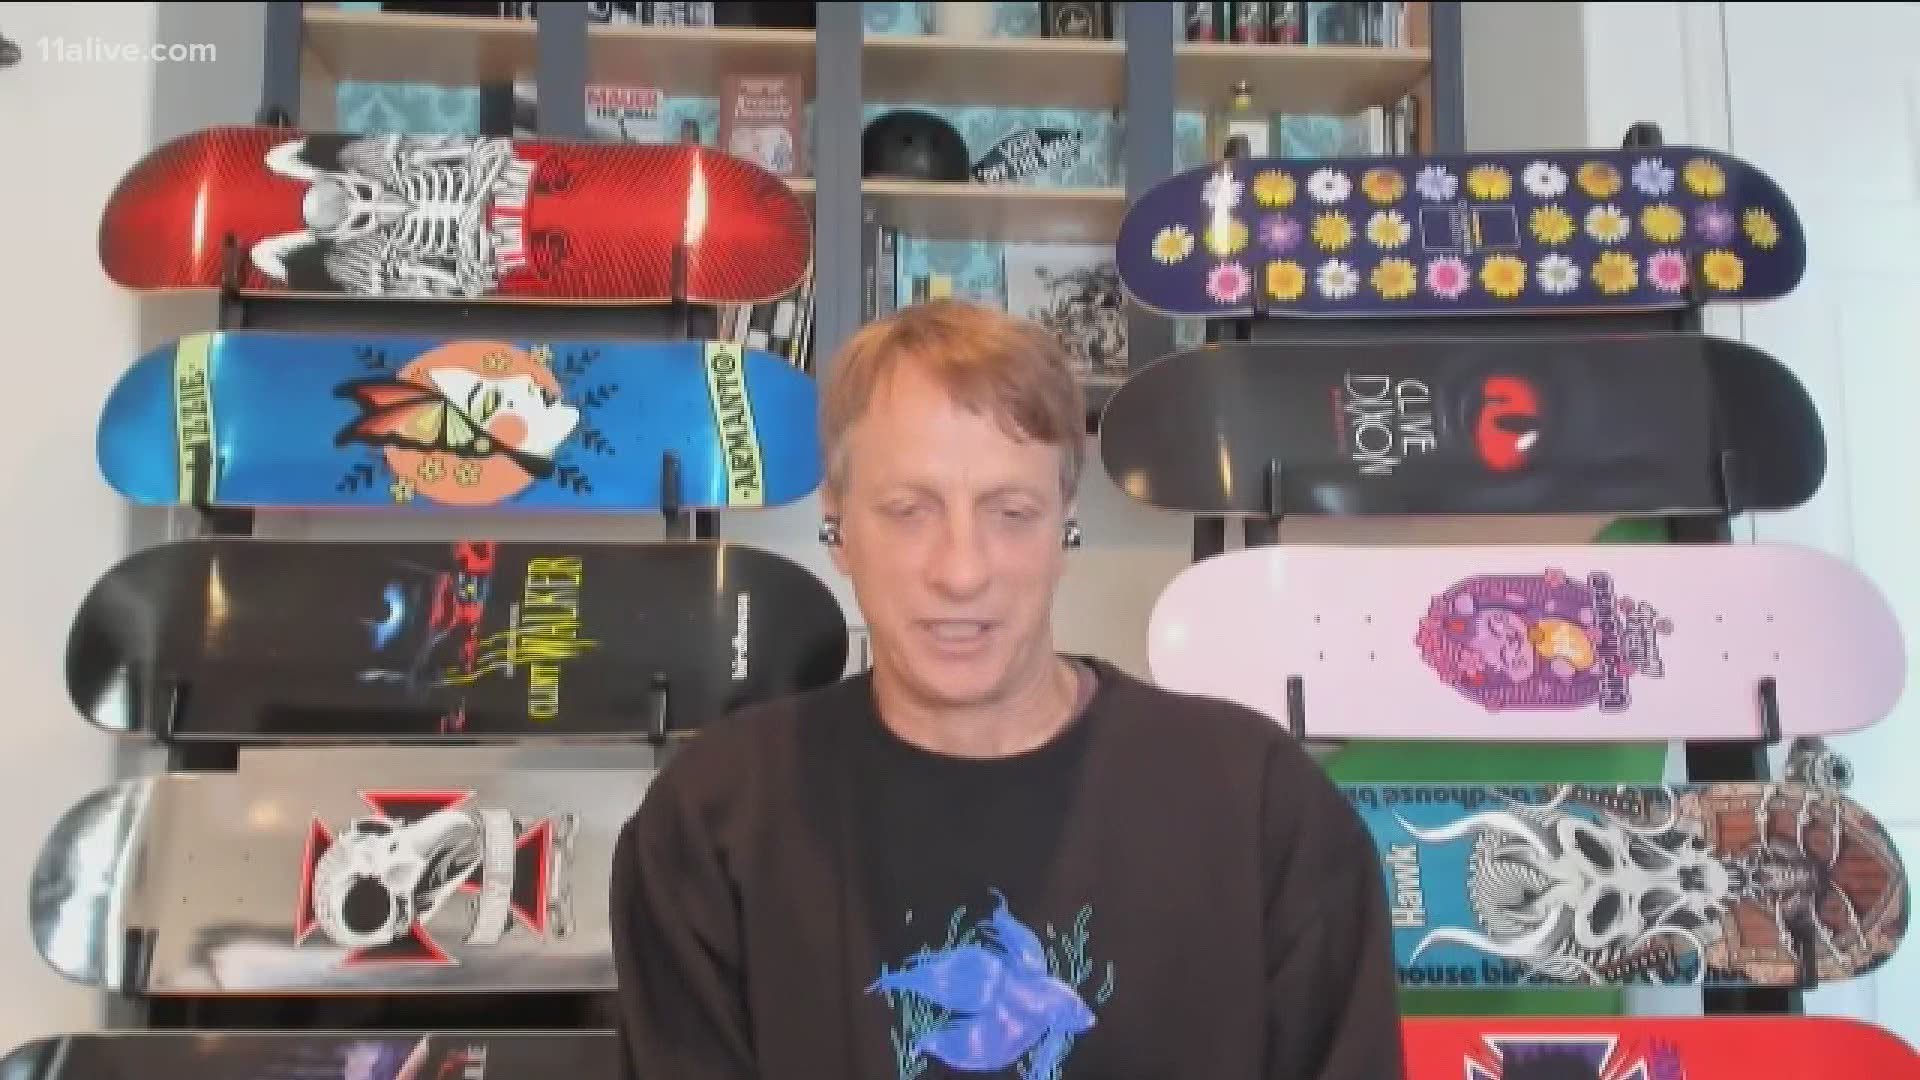 A young boy's mission to deliver a gift to skateboard legend Tony Hawk comes true all thanks to a very special FedEx driver.